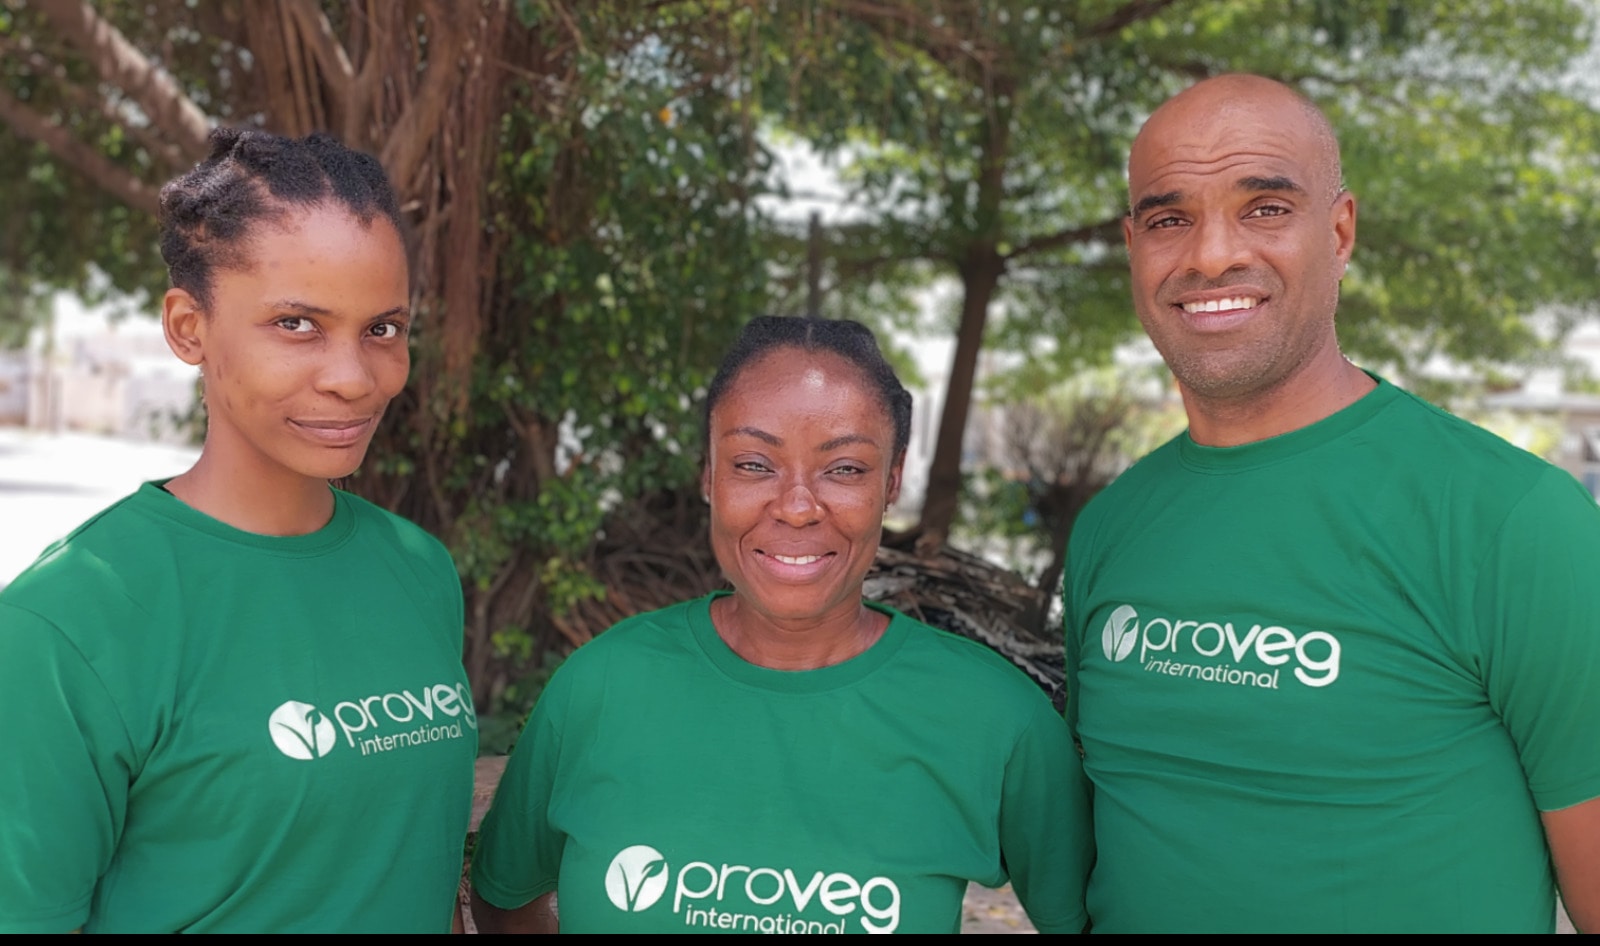 New ProVeg Arm Aims to Make Vegan Food the Next Big Thing in Nigeria